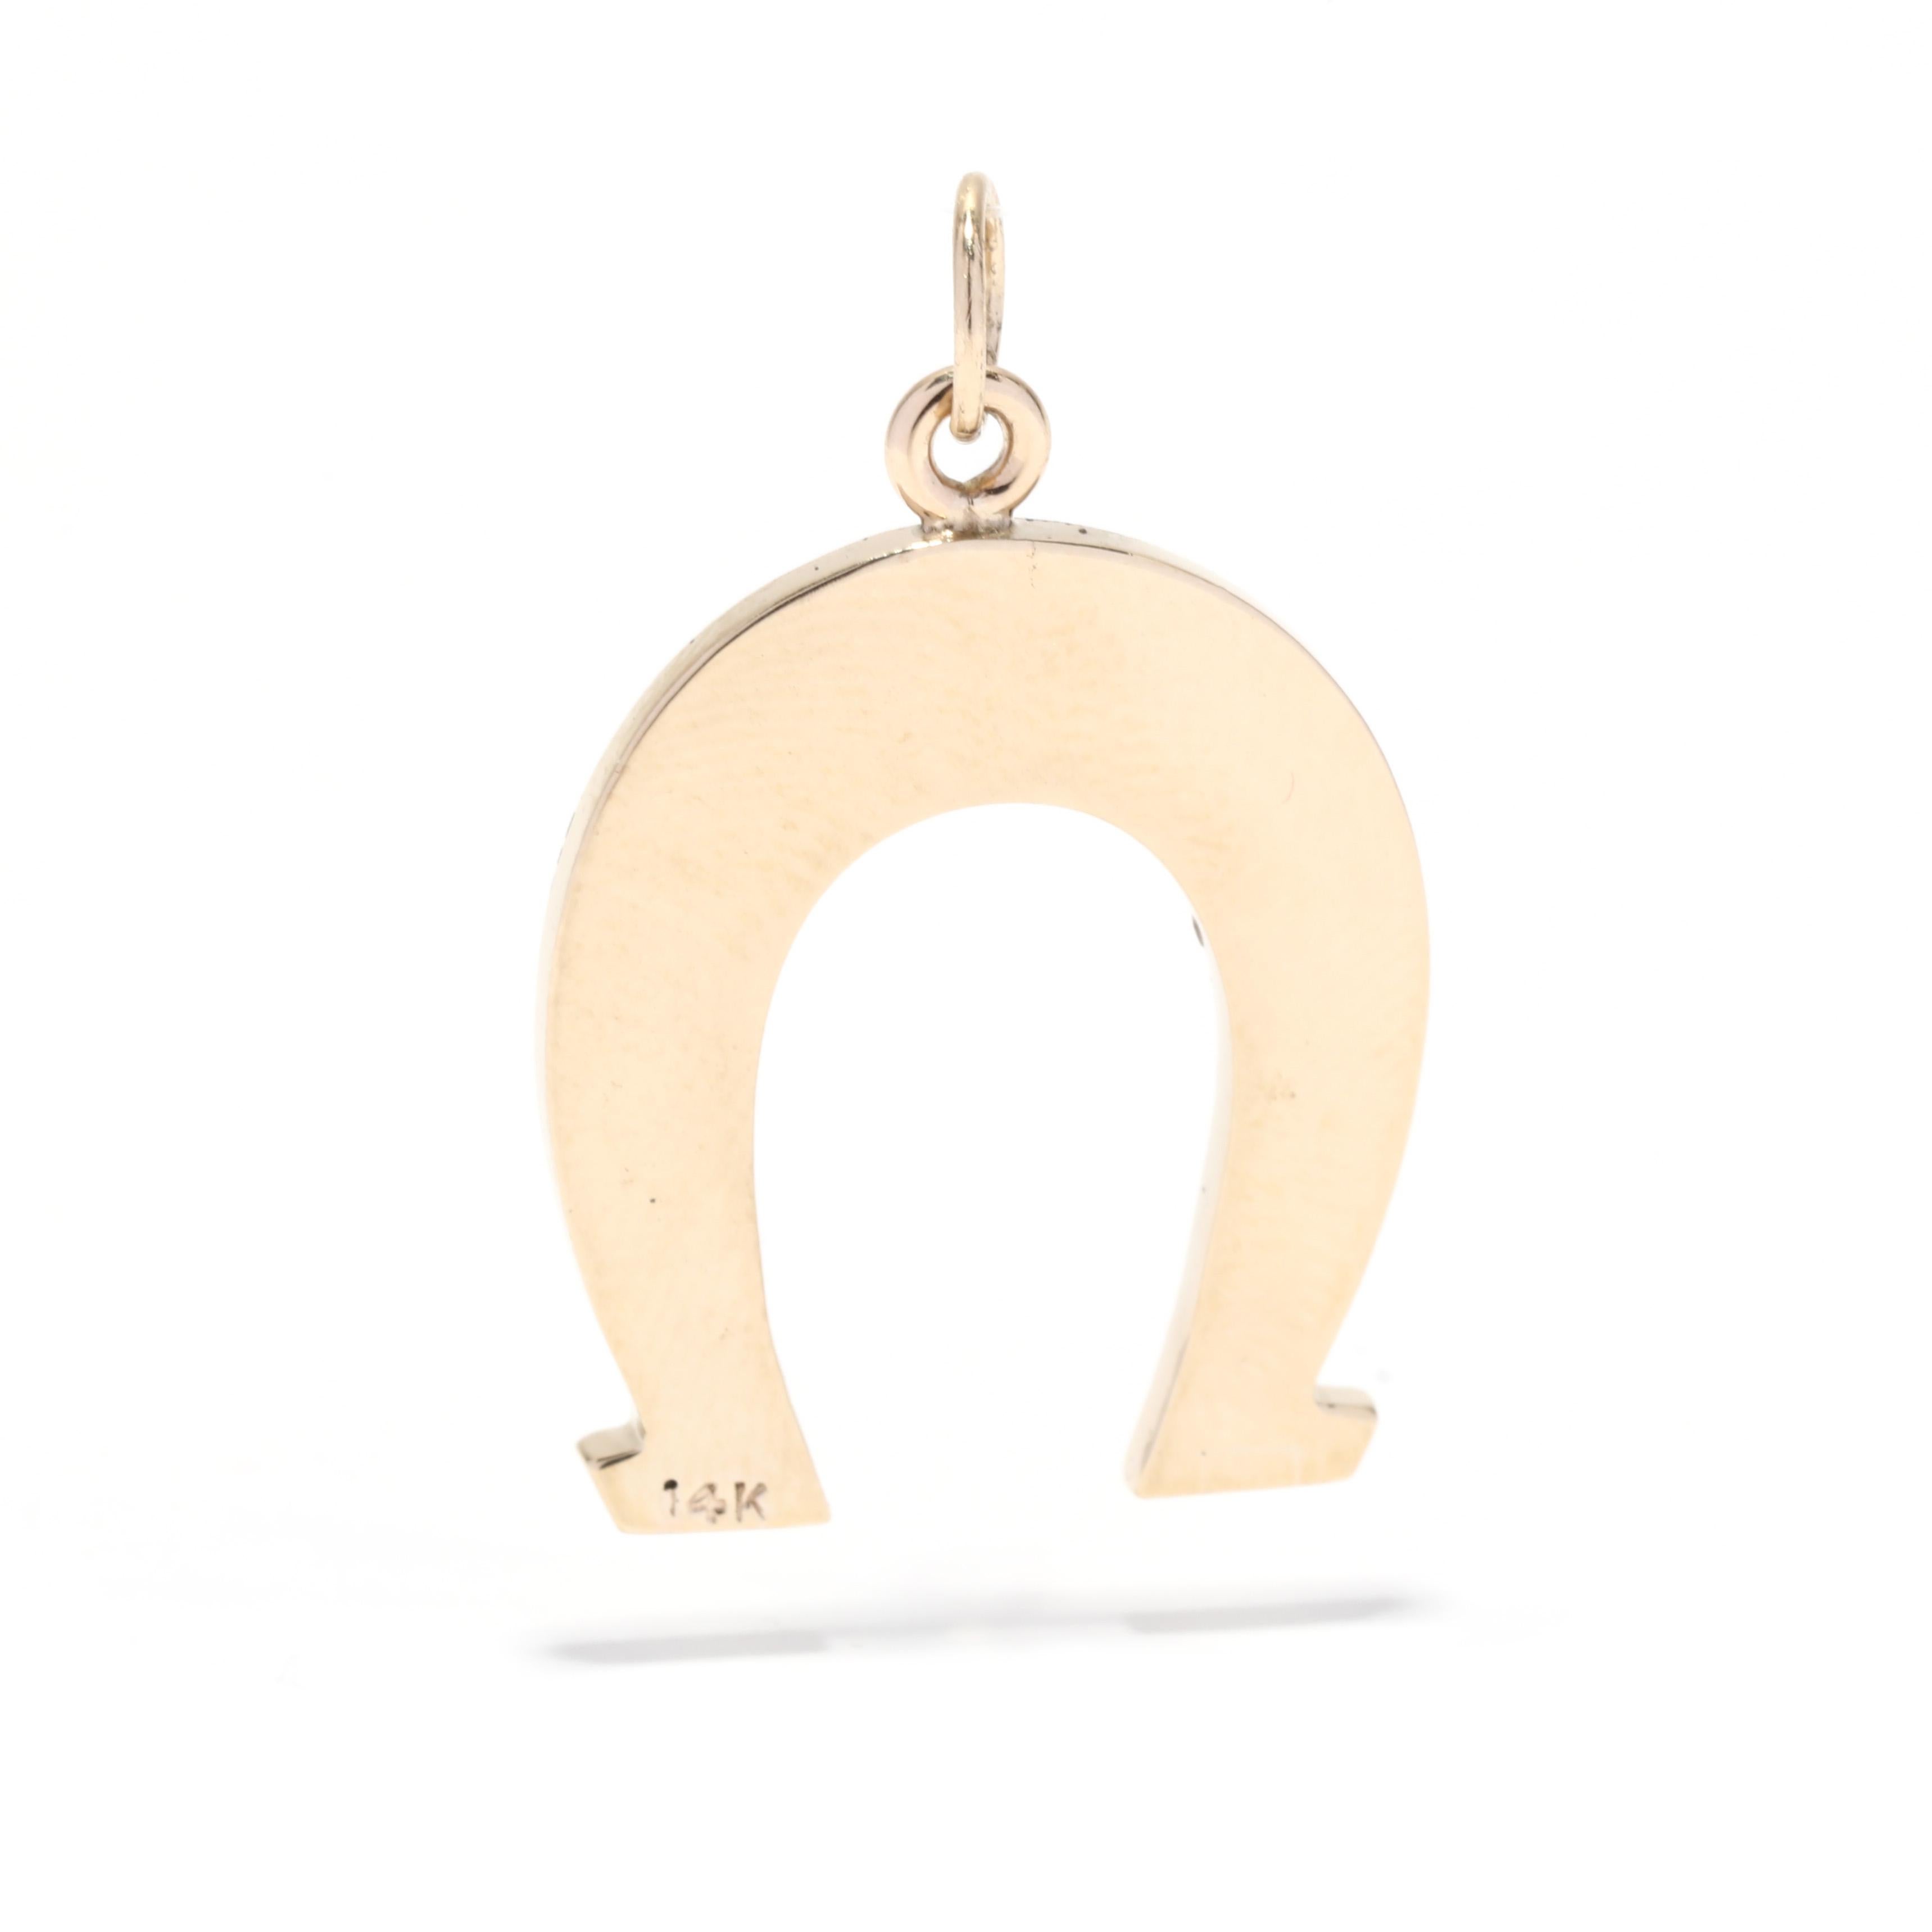 A vintage 14 karat yellow gold horseshoe charm. This large charm features a horseshoe motif with a textured finish and a polished border.

Length: 1 1/8 in.

Width: 3/4 in.

Weight: 2.6 dwts. / 4.04 grams

Stamps: 14K

Ring Sizings &